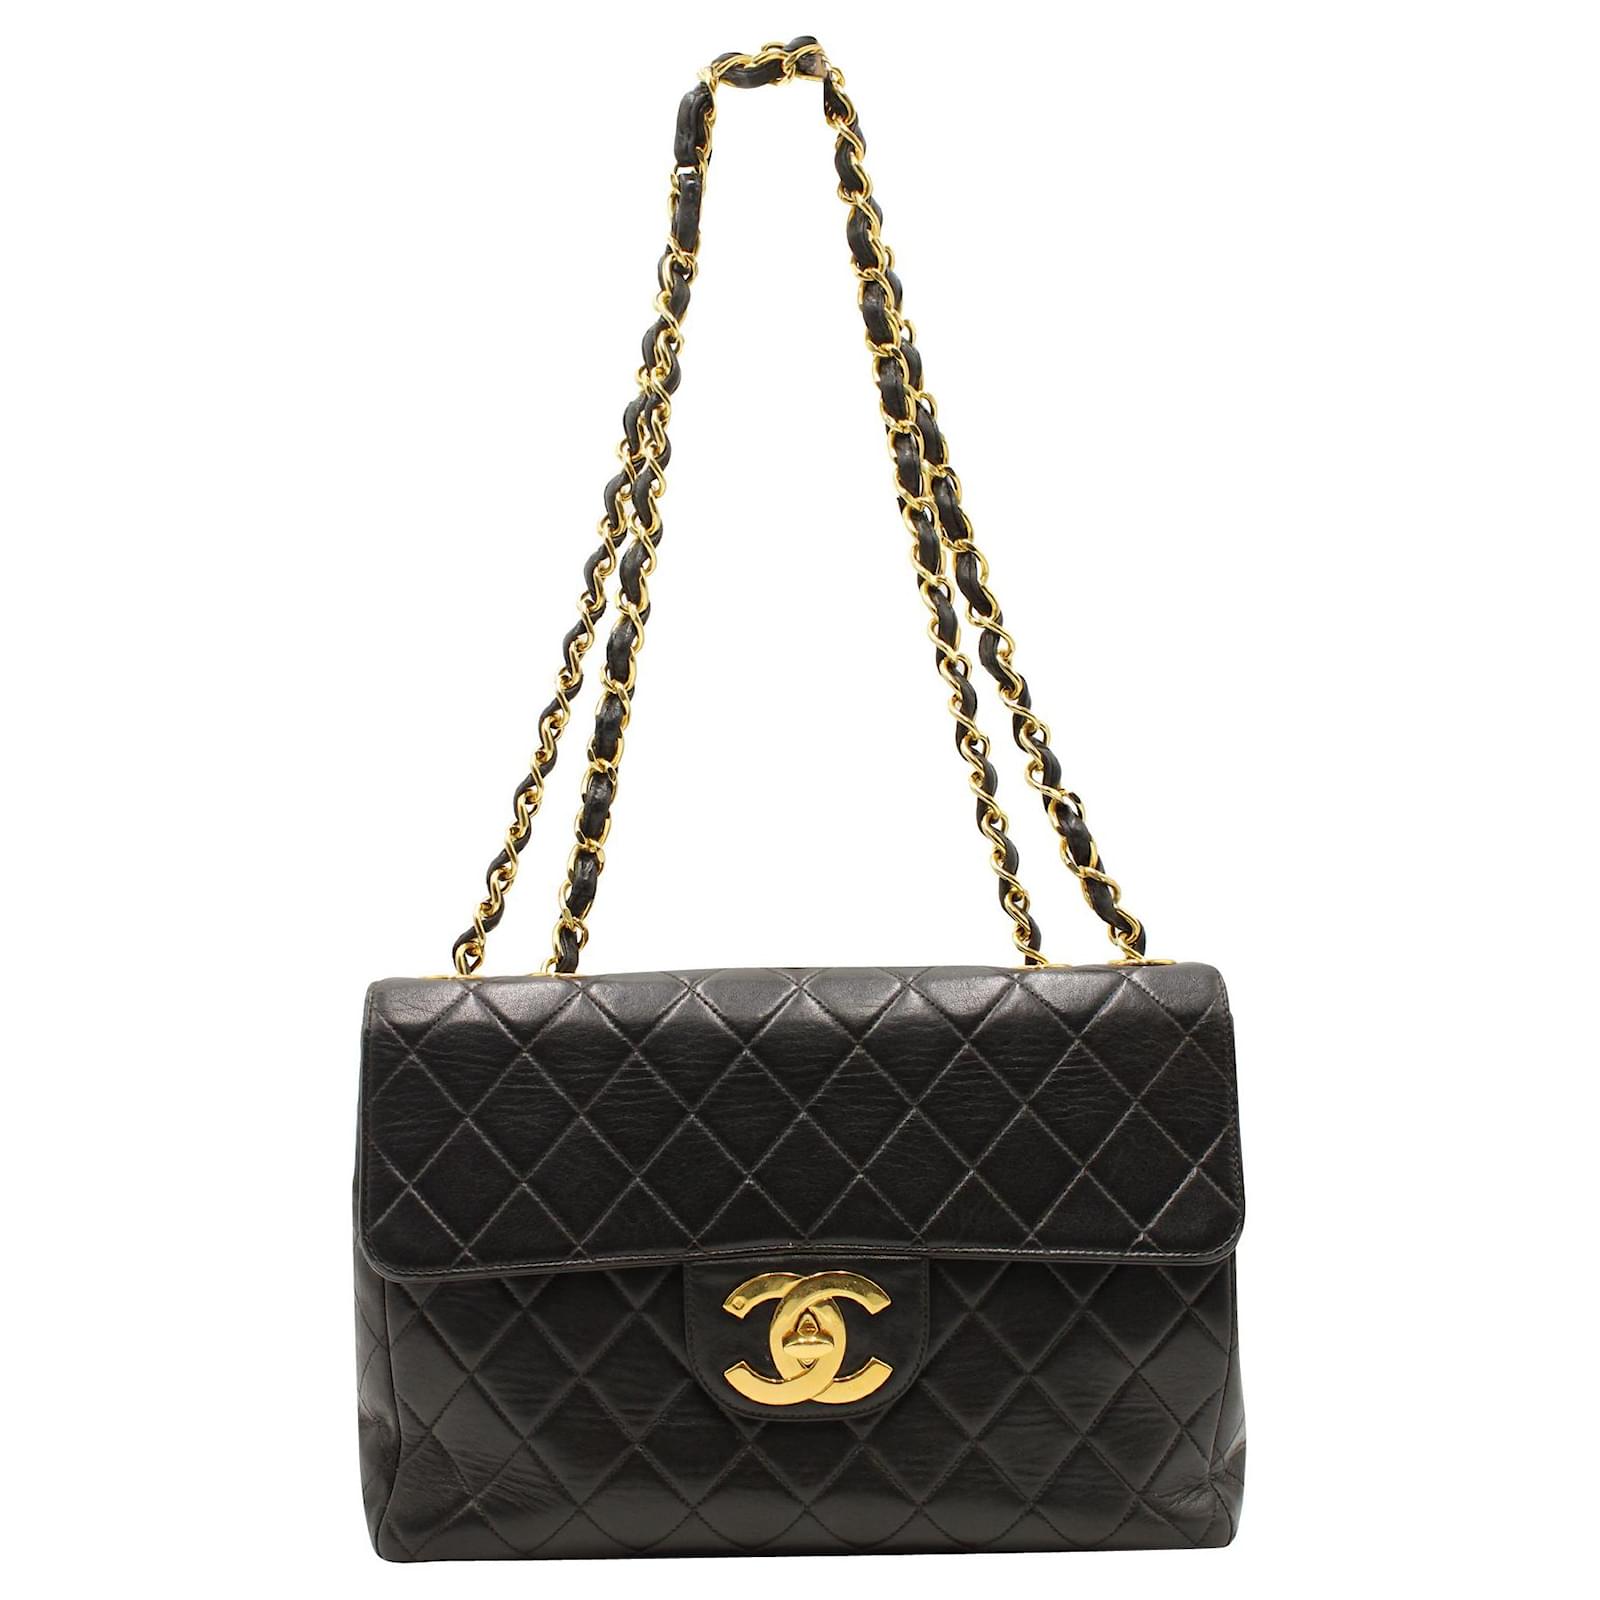 Timeless Chanel 1990s Vintage Black Classic Flap Bag with Golden